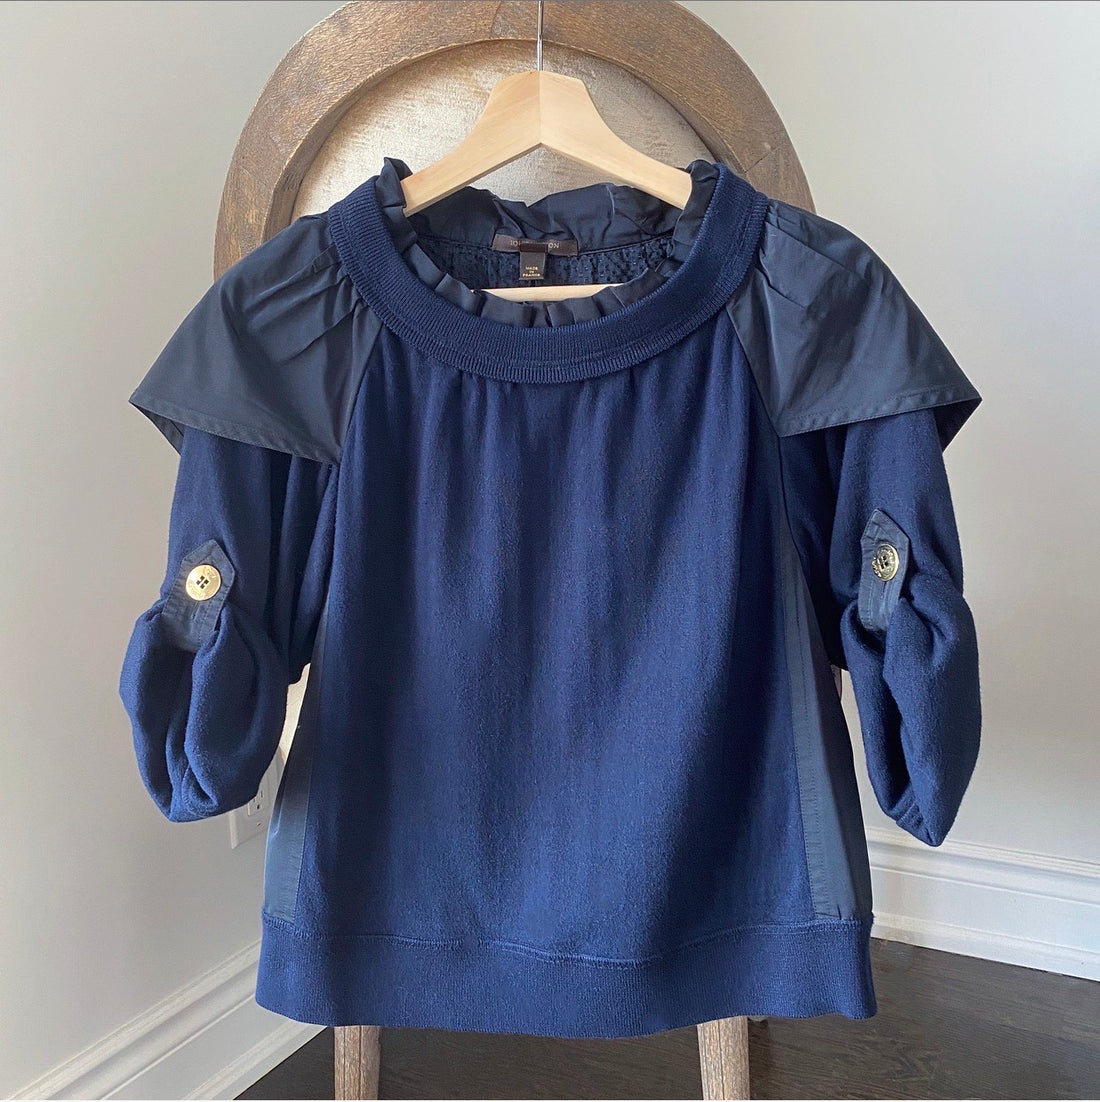 Louis Vuitton Navy Knit and Nylon Ruffle Top - FR38 / 6